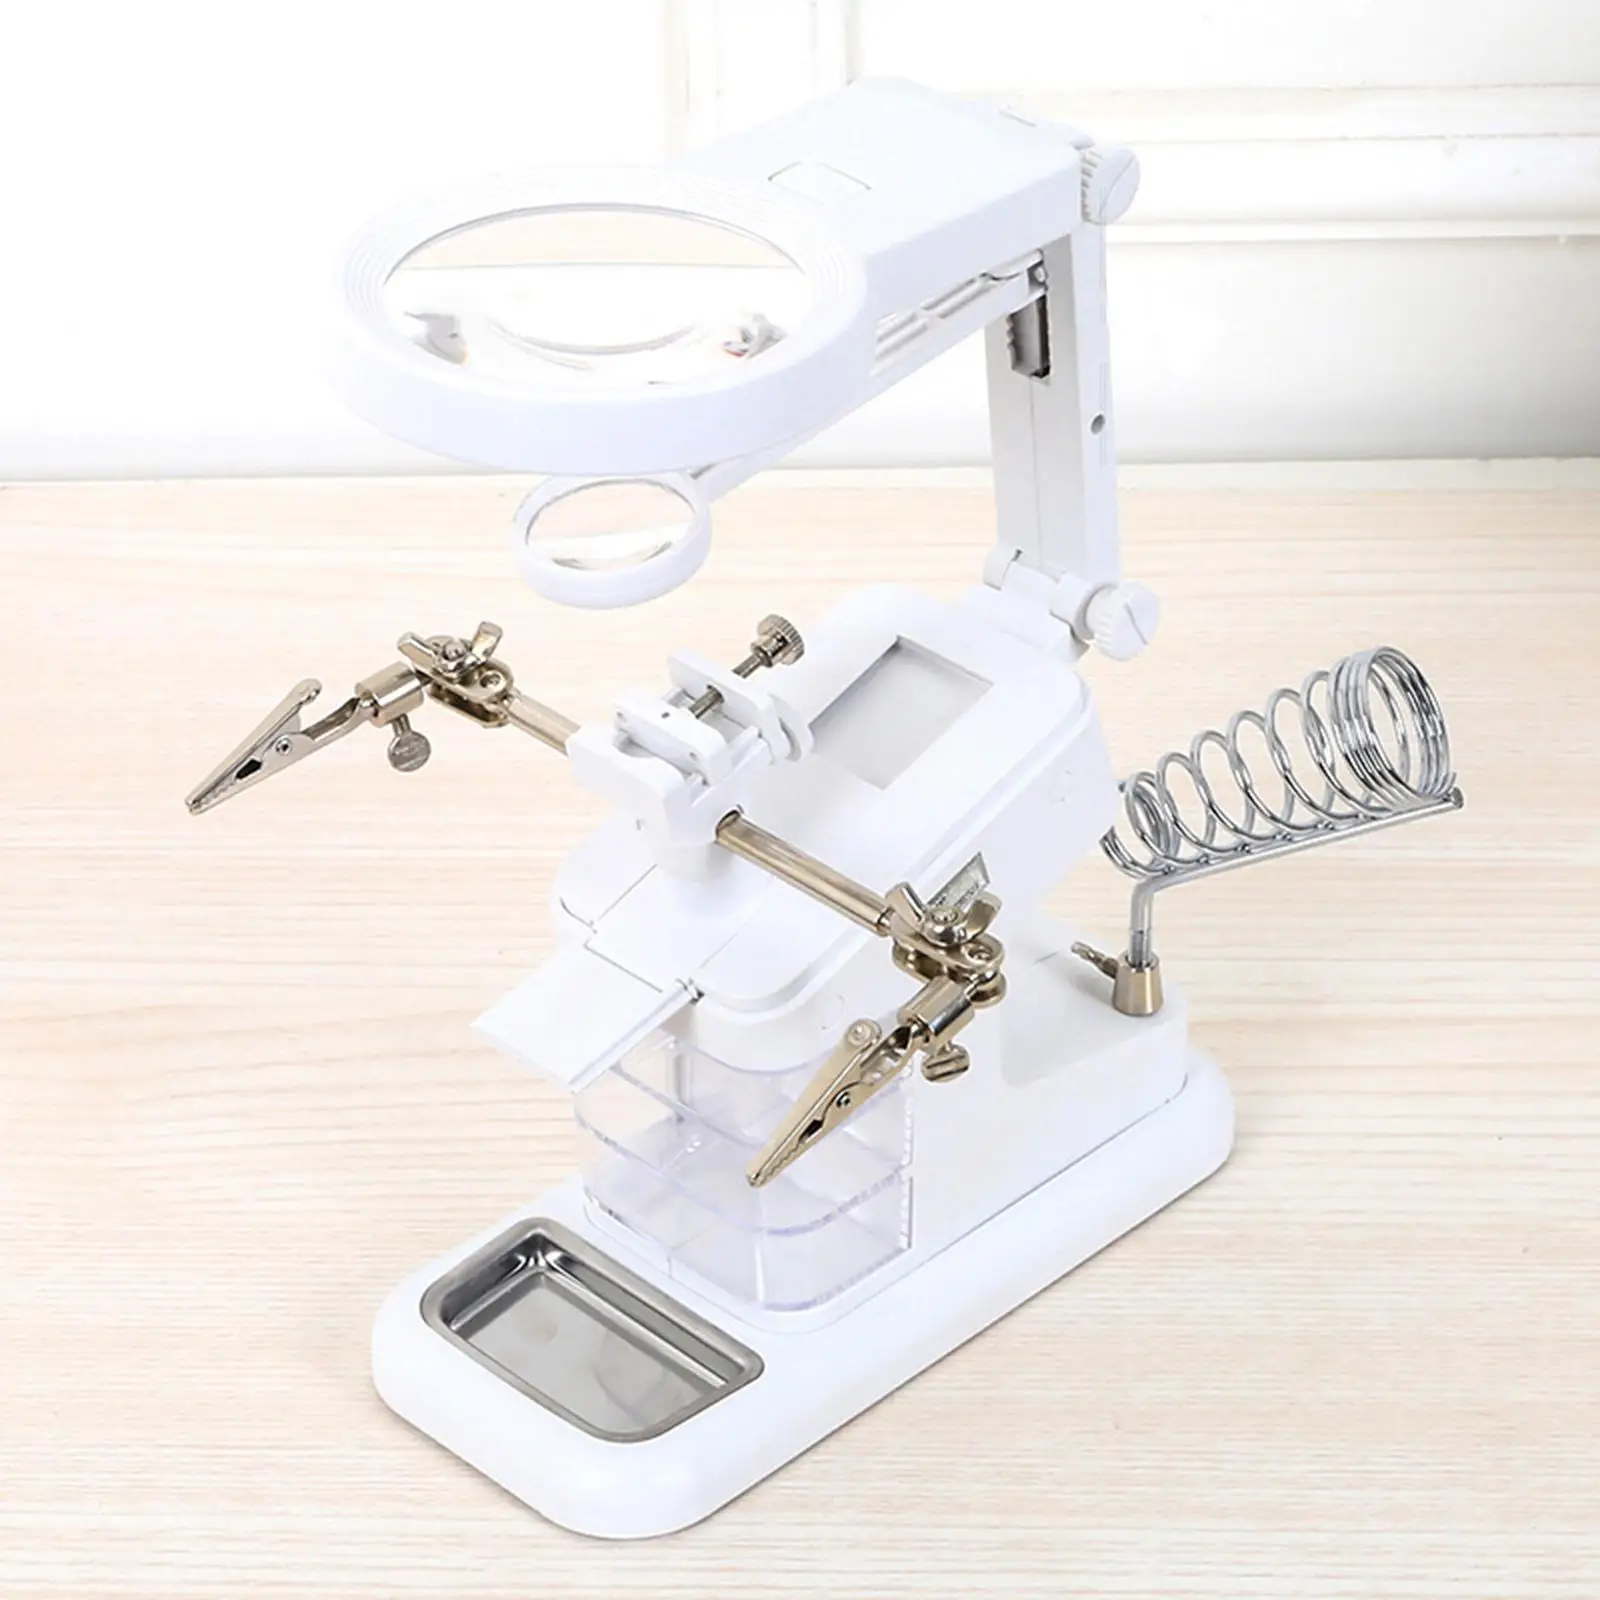 Magnifier Stand with Clip Clamp Base Adjustable Bench Magnifying Station for Crafts Painting Miniature Soldering Hobby Carving